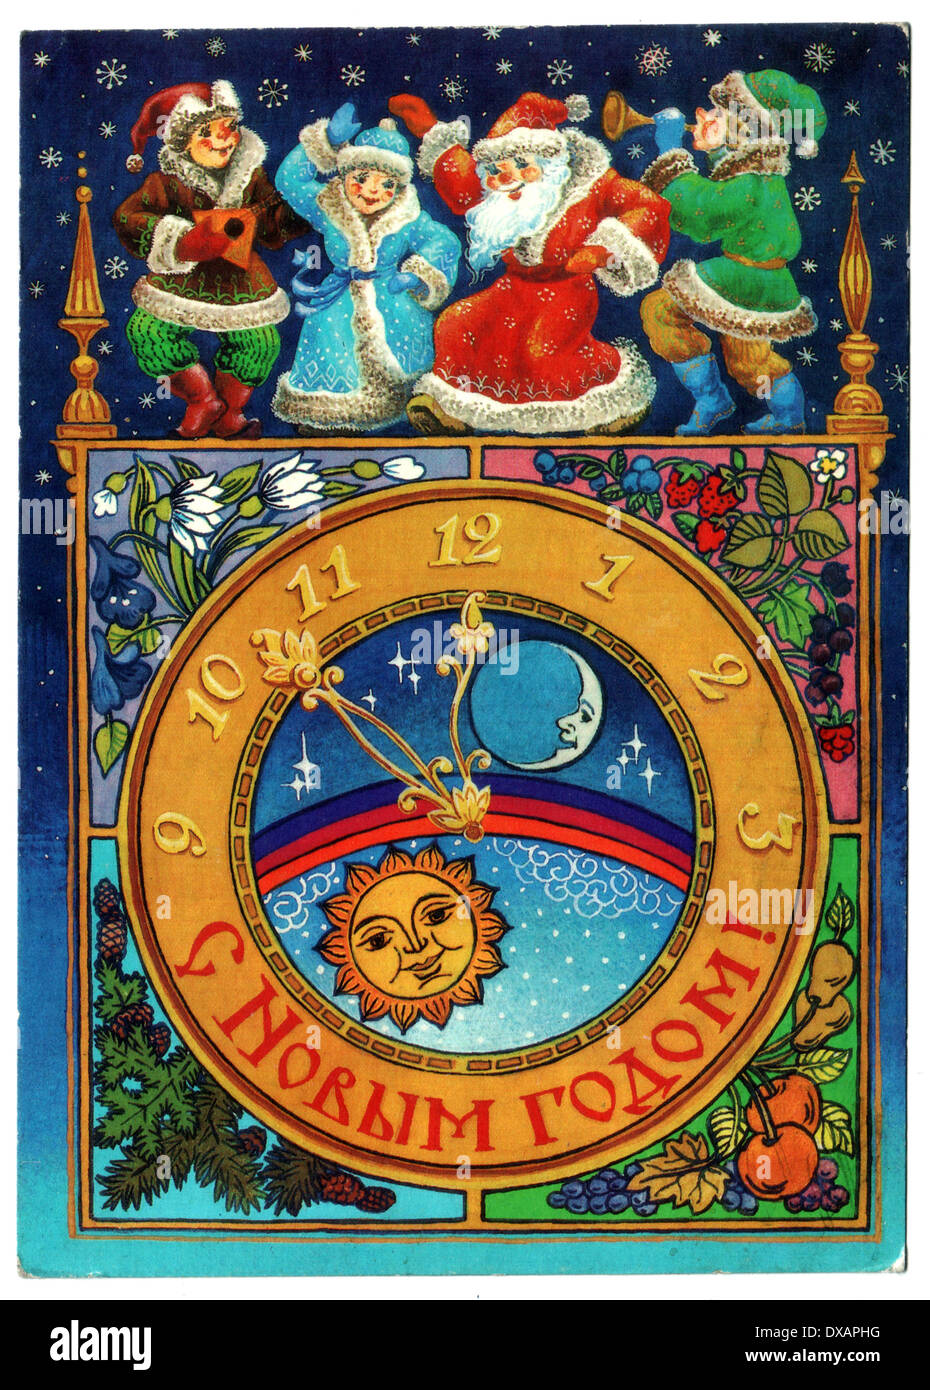 USSR - CIRCA 1988: Postcard printed in the USSR shows draw by Pohitinov - New watch with the seasons, circa 1988. Stock Photo